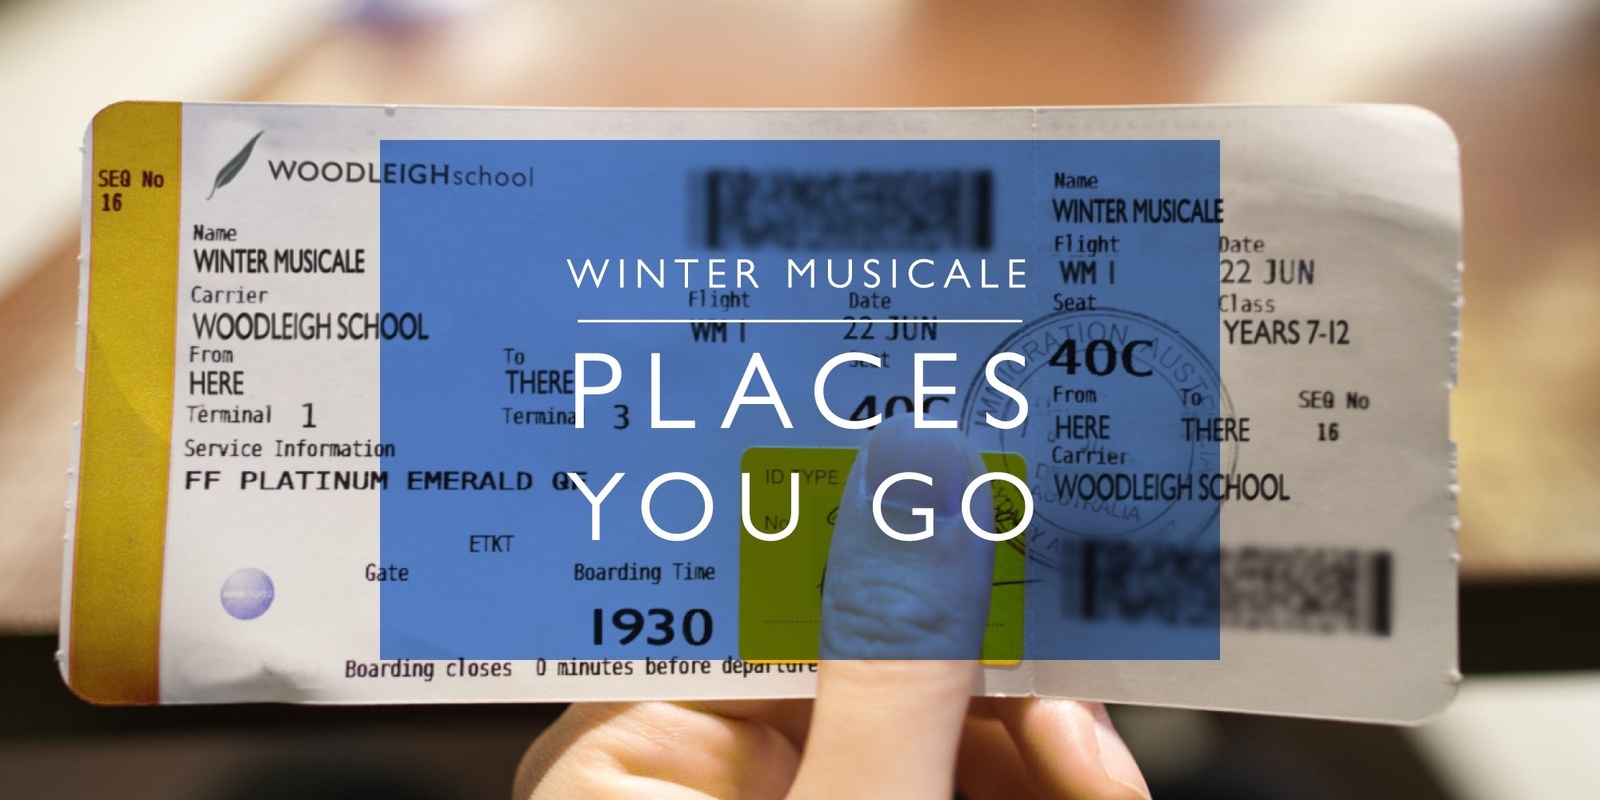 Woodleigh Winter Musicale 2023 - PLACES YOU GO